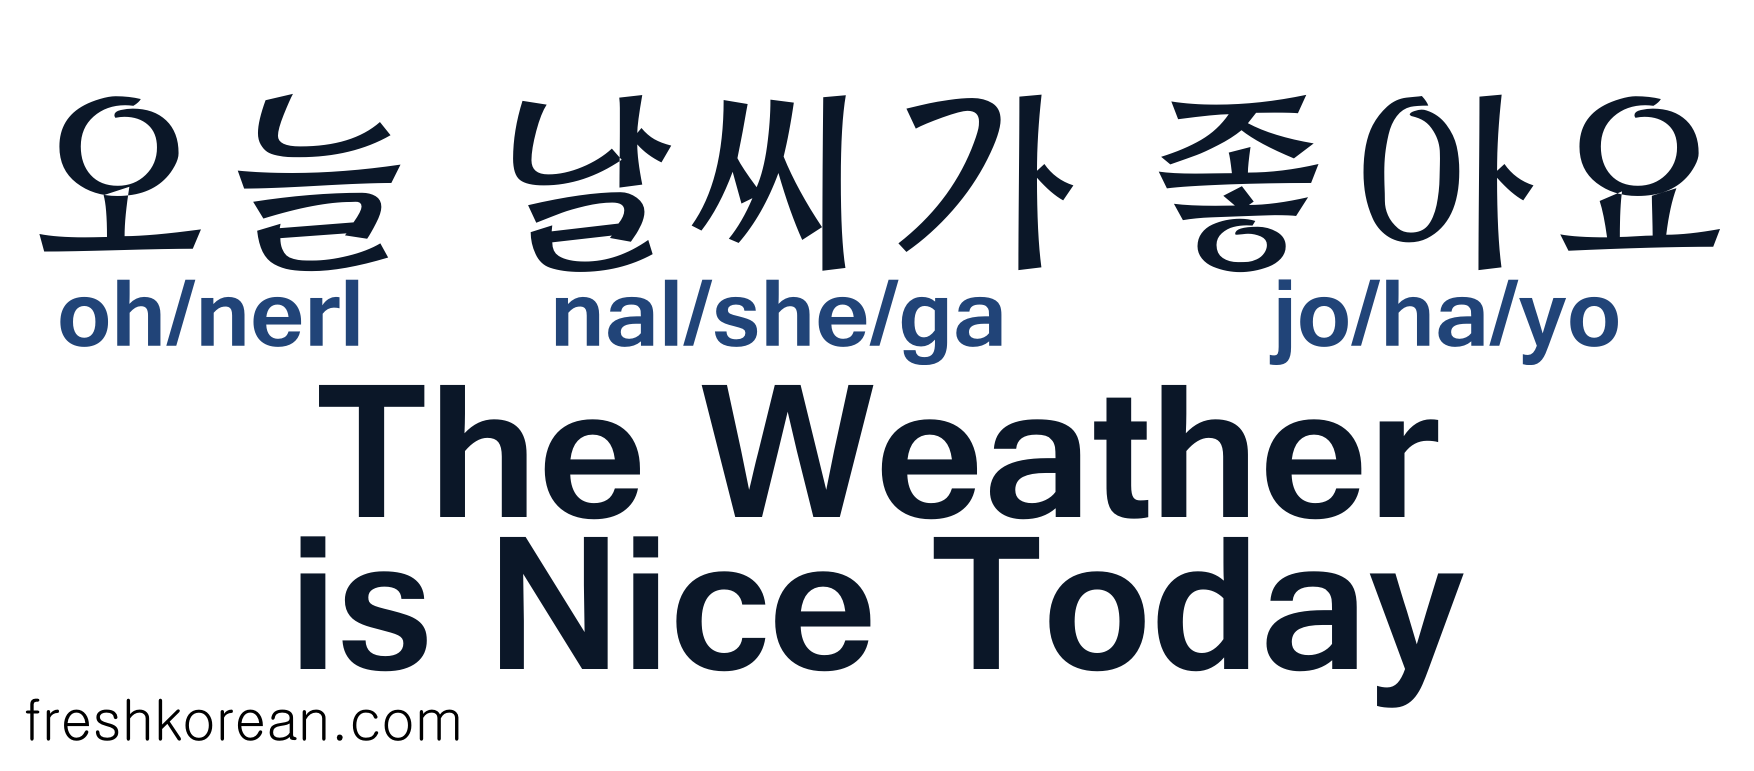 Fresh Korean Phrase 3 – The Weather is Nice Today